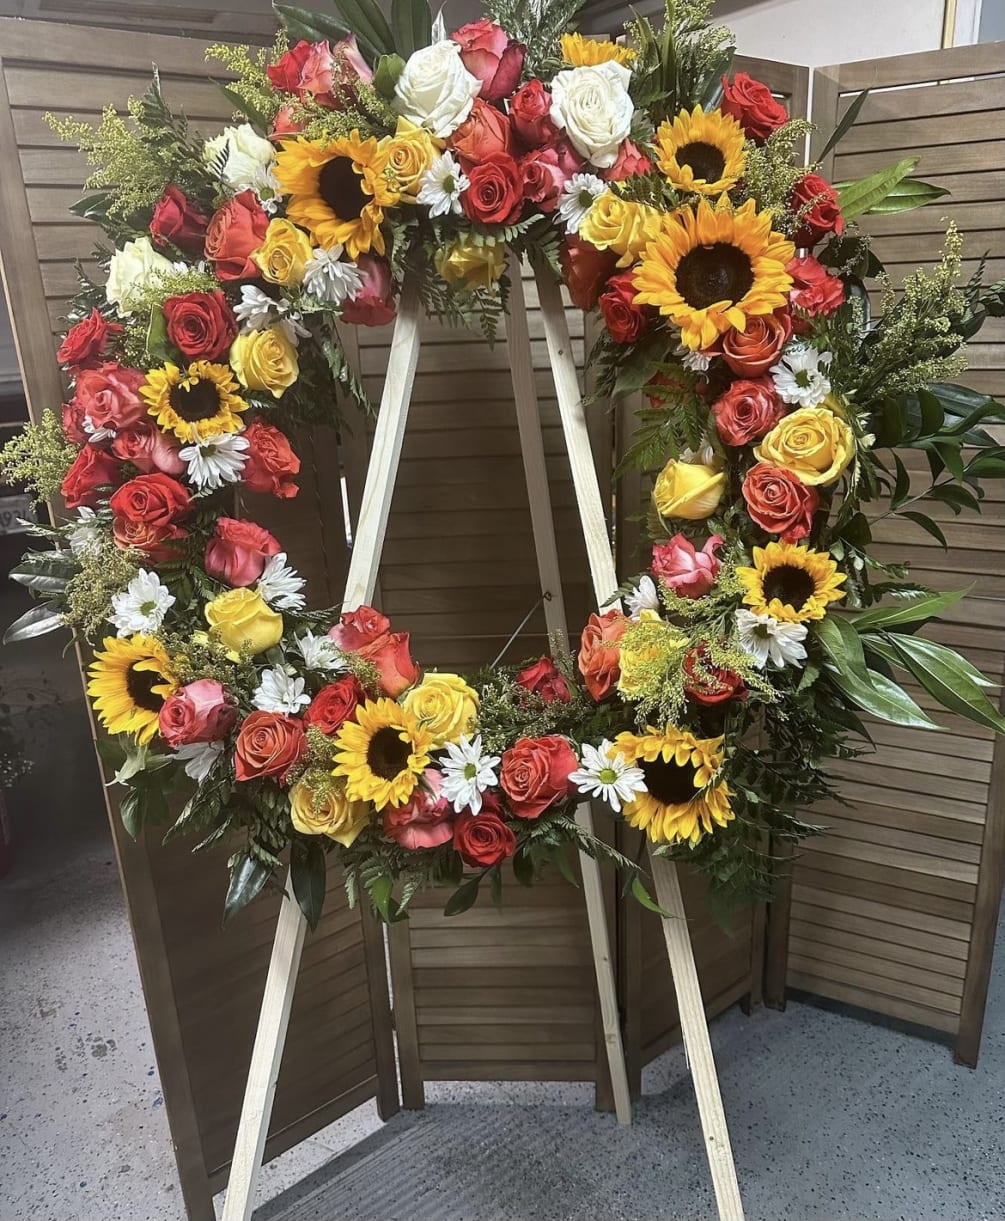 This beautifully designed wreath has a mixture of flowers including sunflowers, daisies